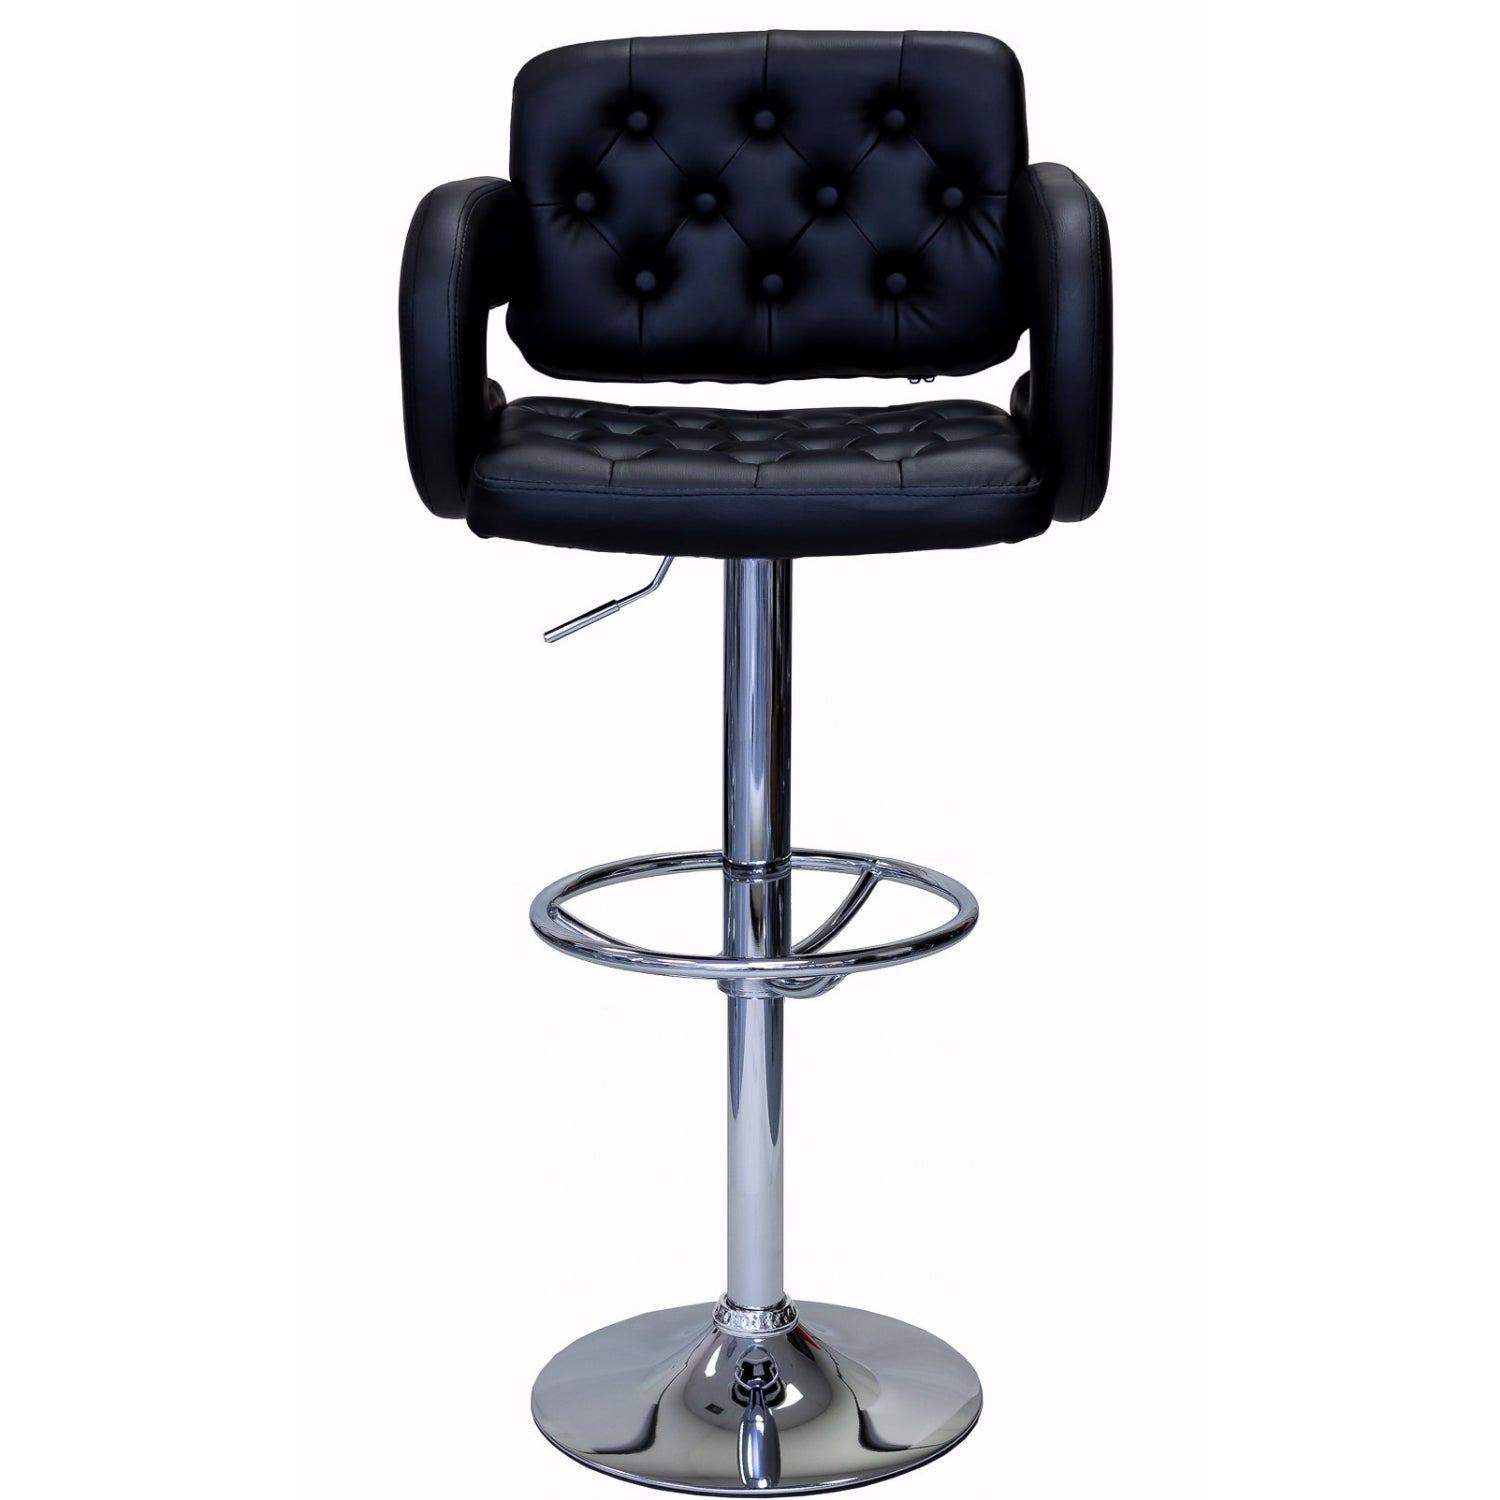 ViscoLogic WESTMINSTER 24 to 33 inch height adjustable tufted bar stool (Single Stool)